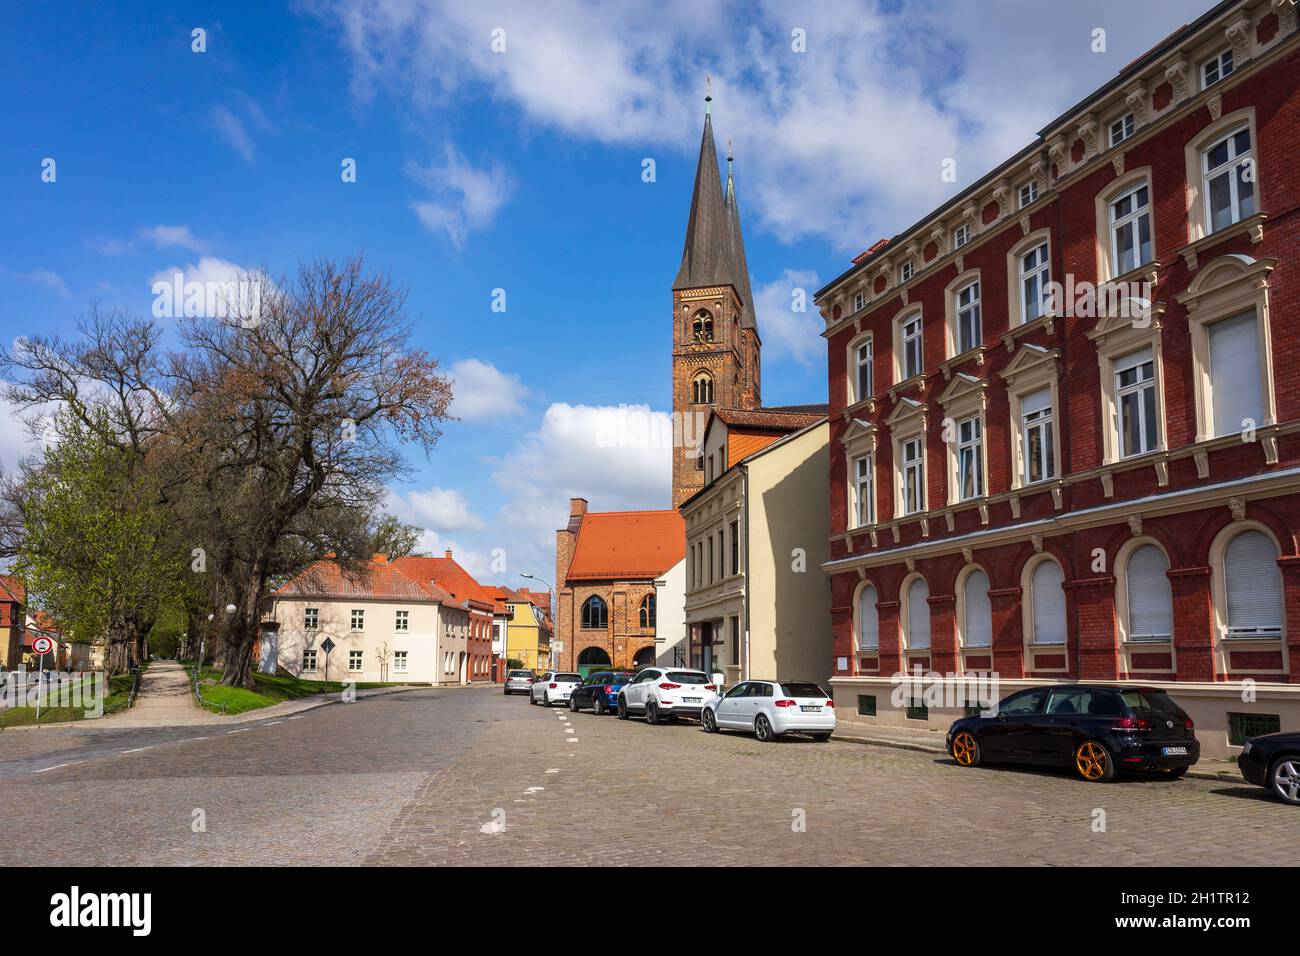 STENDAL, GERMANY - APRIL 24, 2021: Houses and buildings on the streets in the old town. In the background St. Nicholas Church. Hansestadt Stendal is a Stock Photo